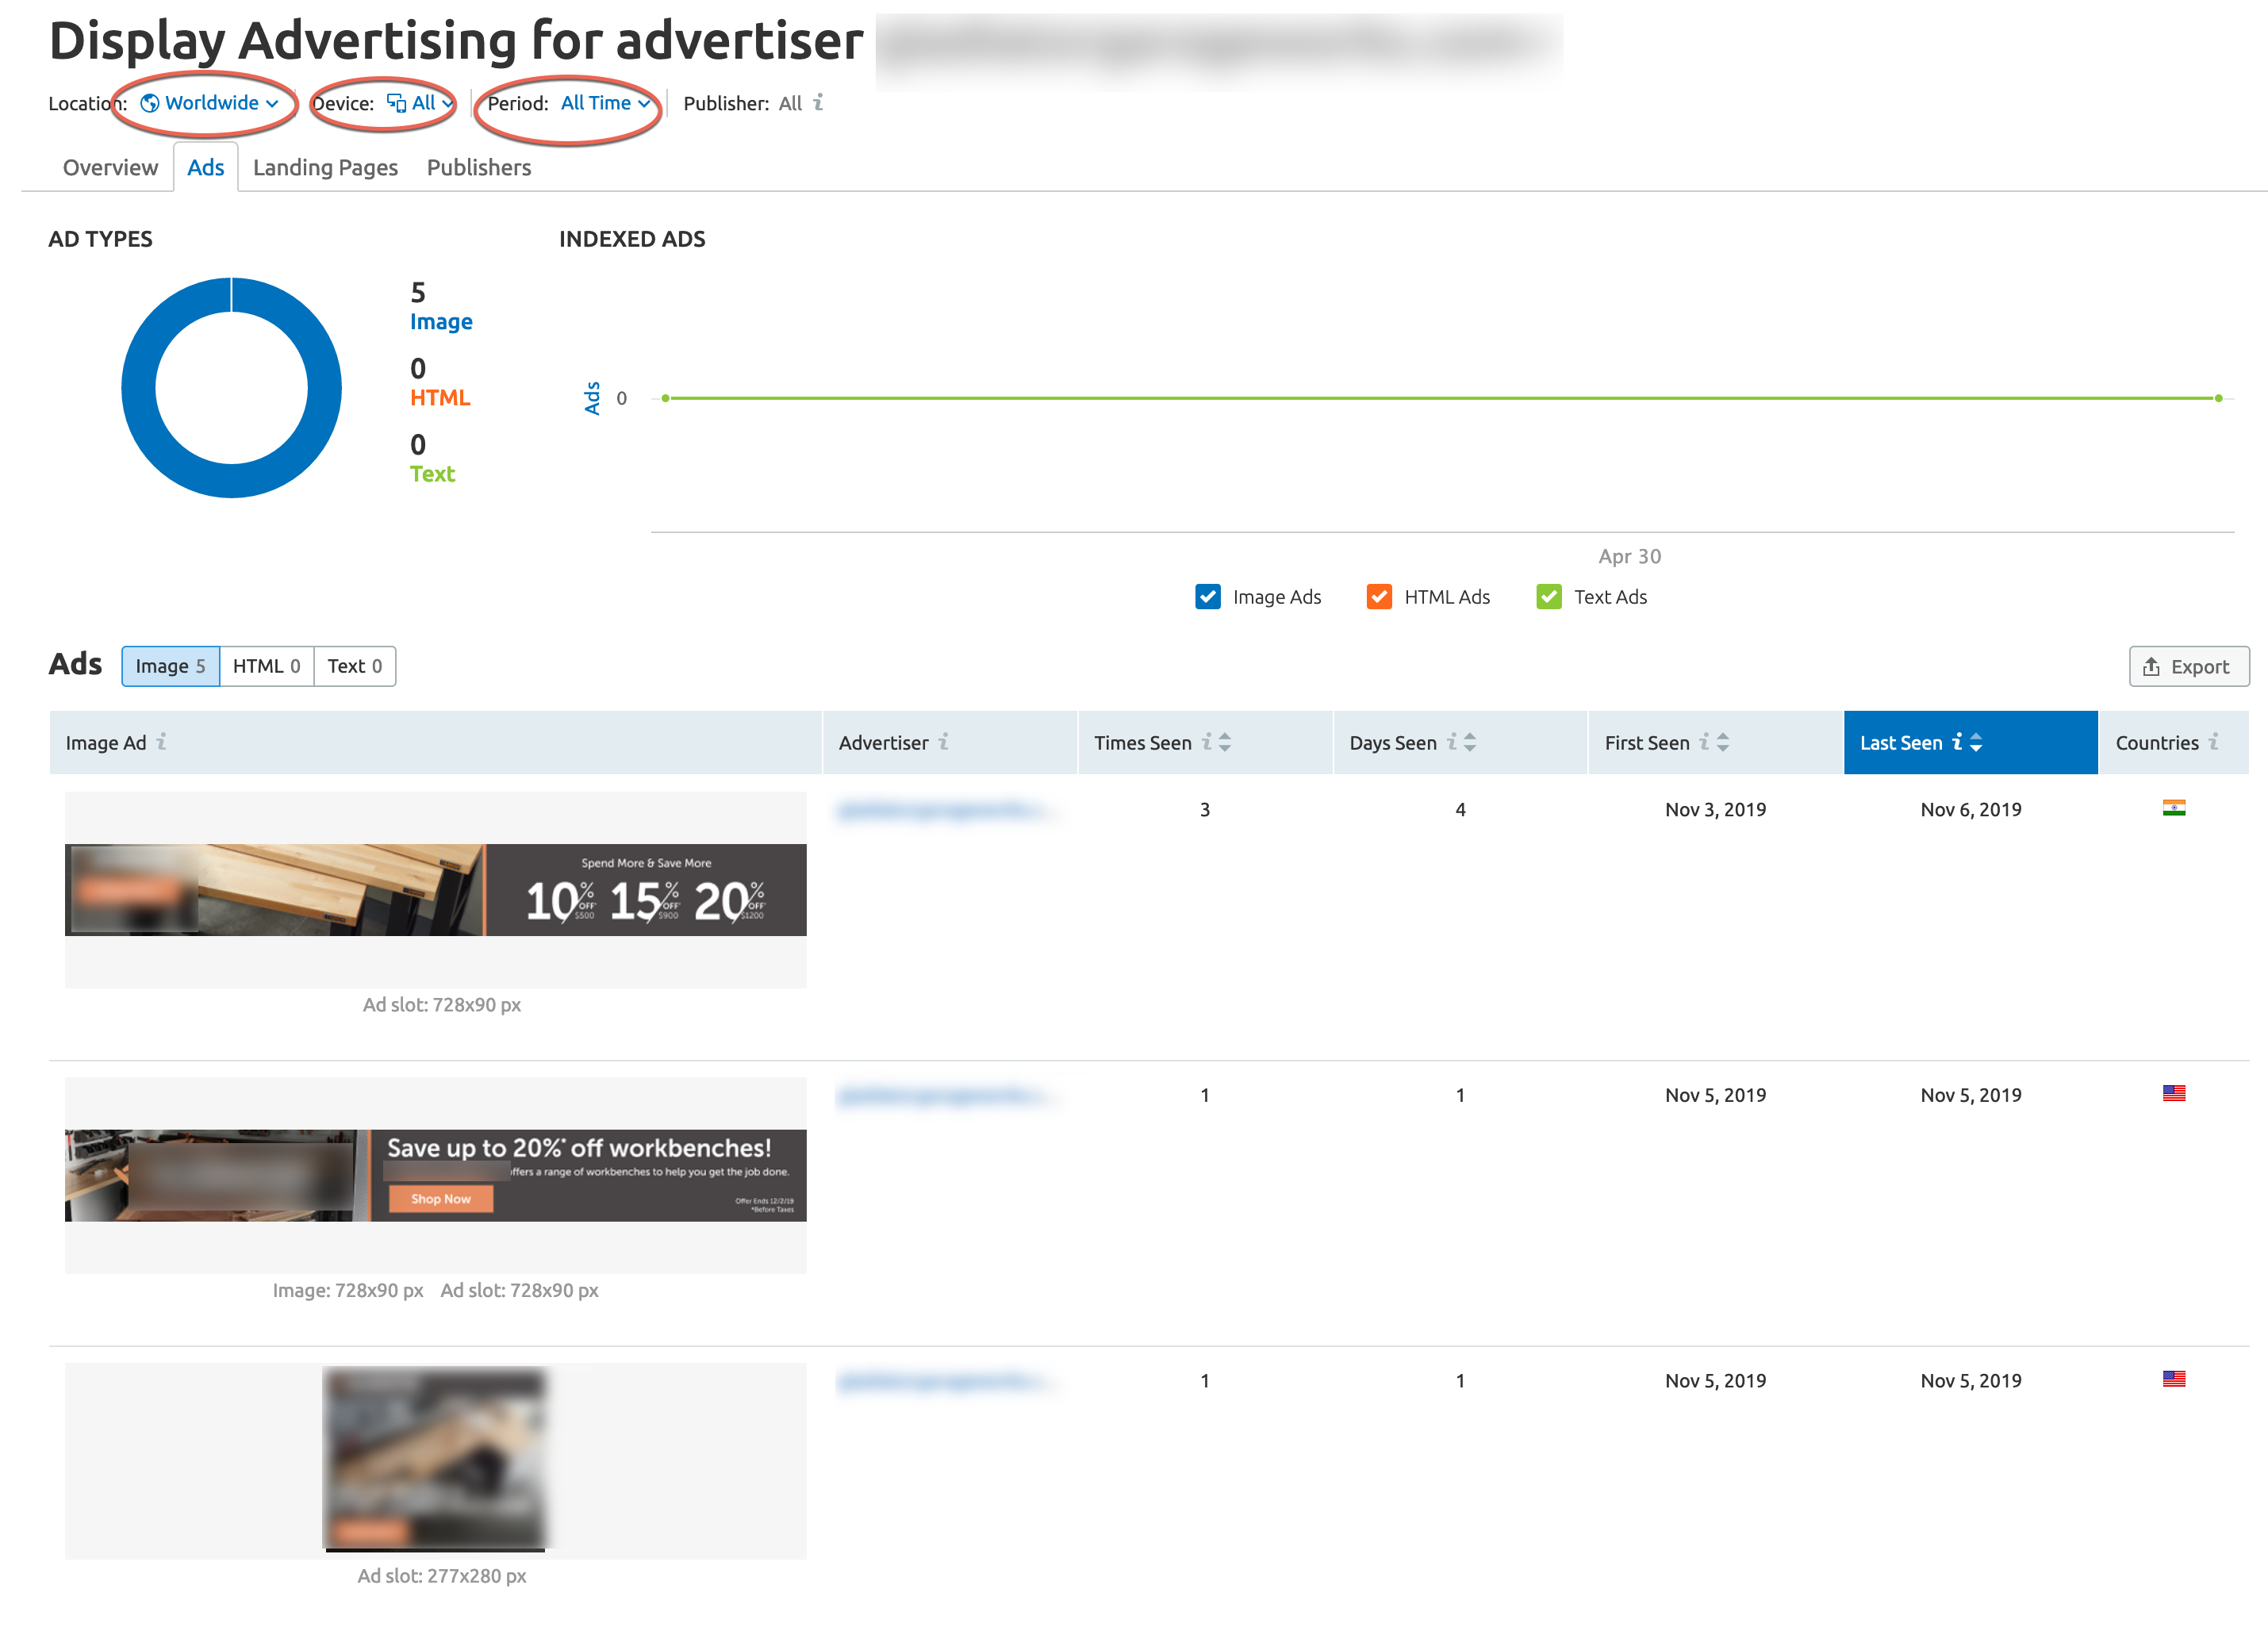 PPC Ad Messaging - Display Advertising